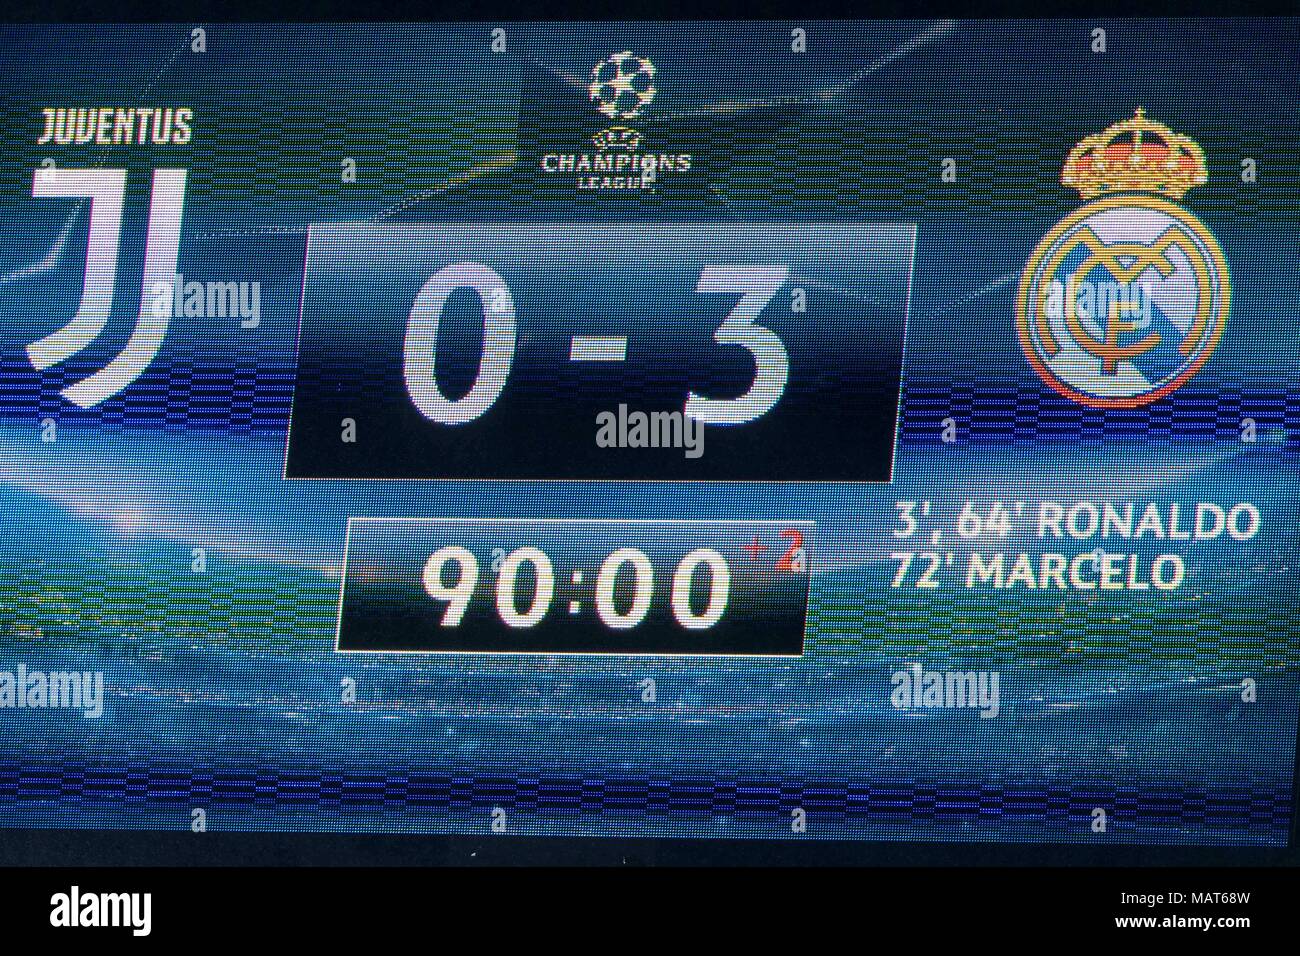 uefa champions league today match result